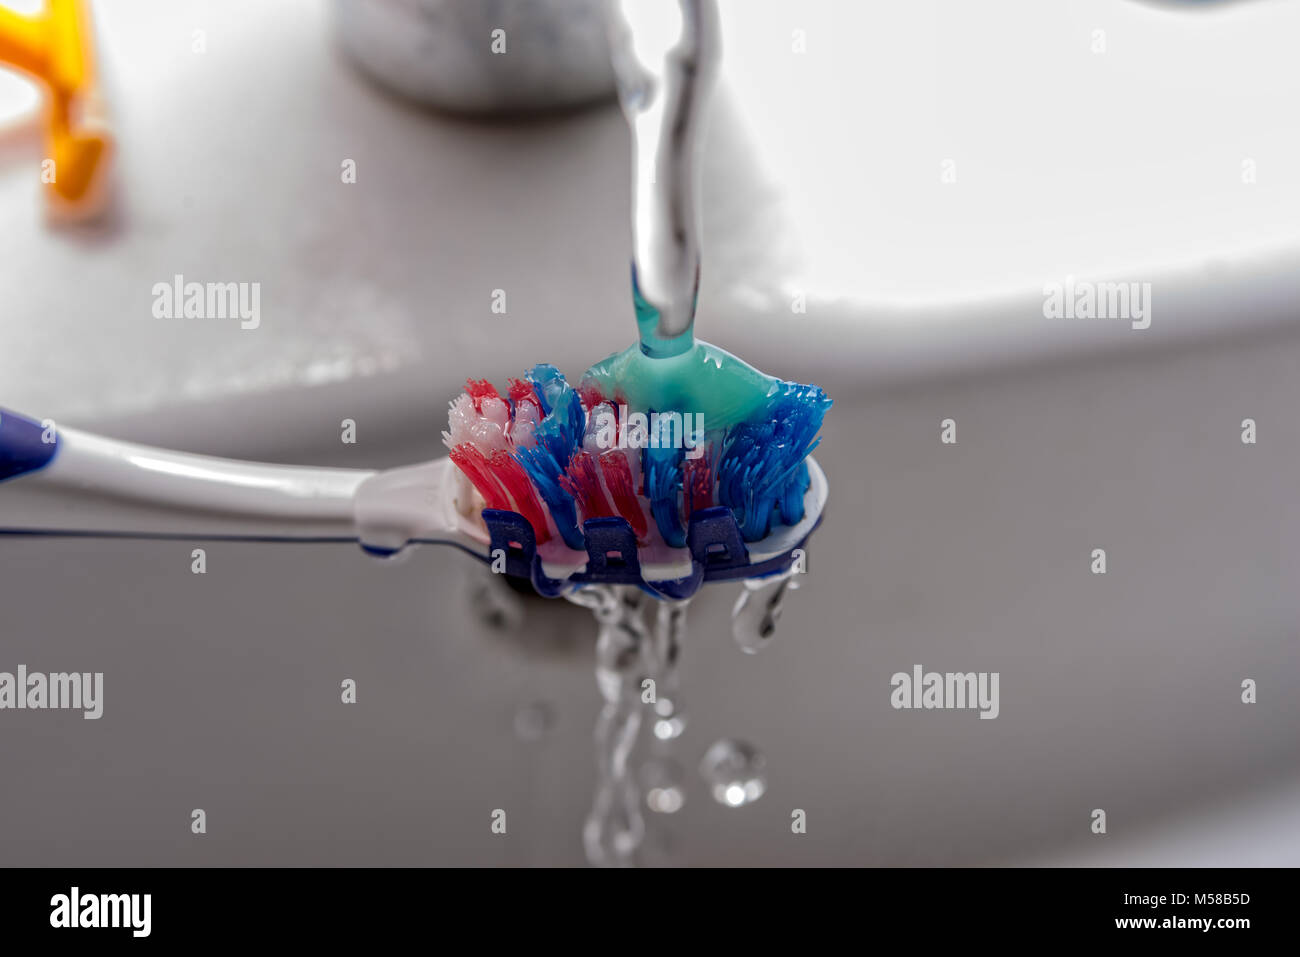 Toothbrush with toothpaste and water from the faucet Stock Photo